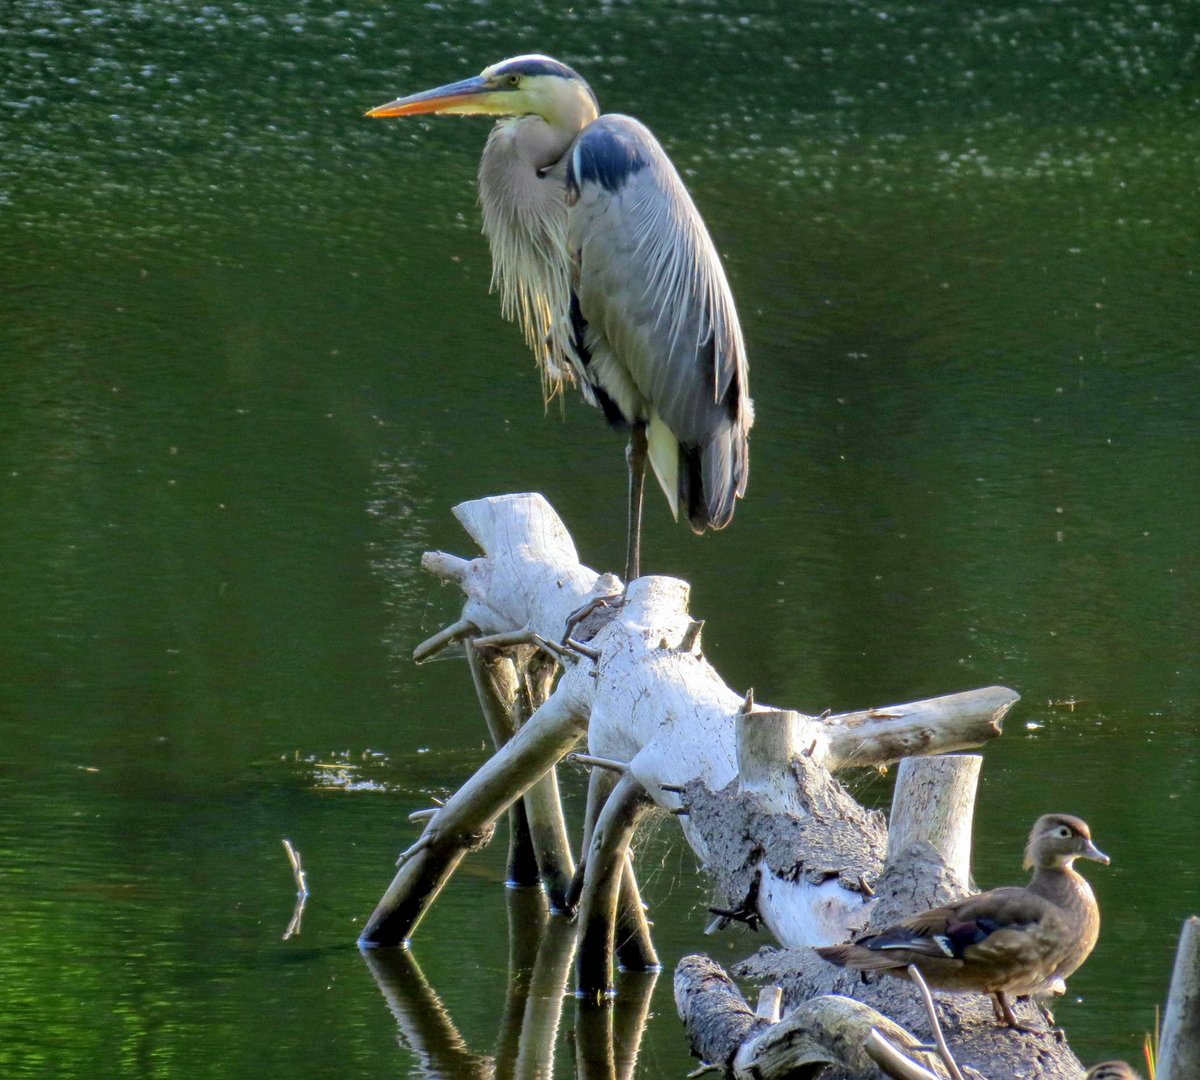 6. Great Blue Heron and Wood Duck